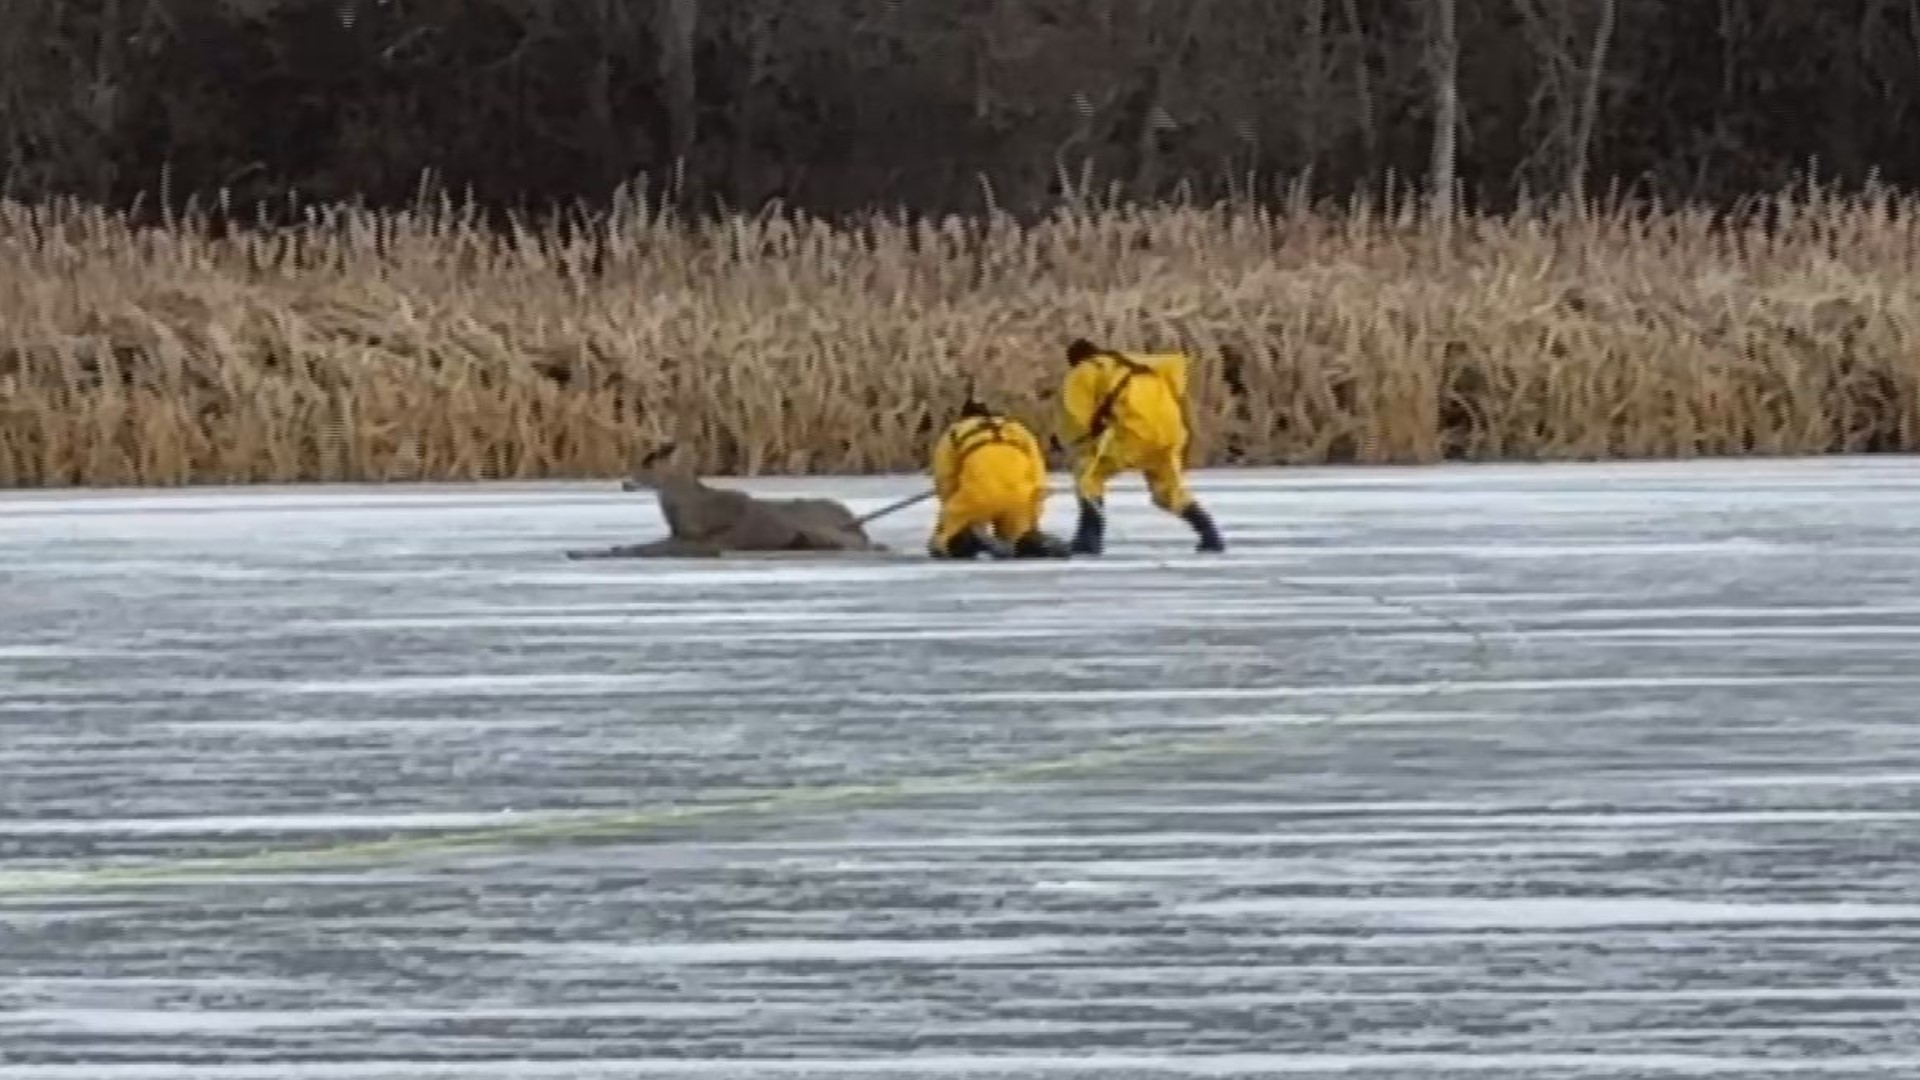 A deer plagued by poor decision-making got a second chance, after members of the Prior Lake Fire and Rescue team pushed him off the thin ice of Pike Lake.